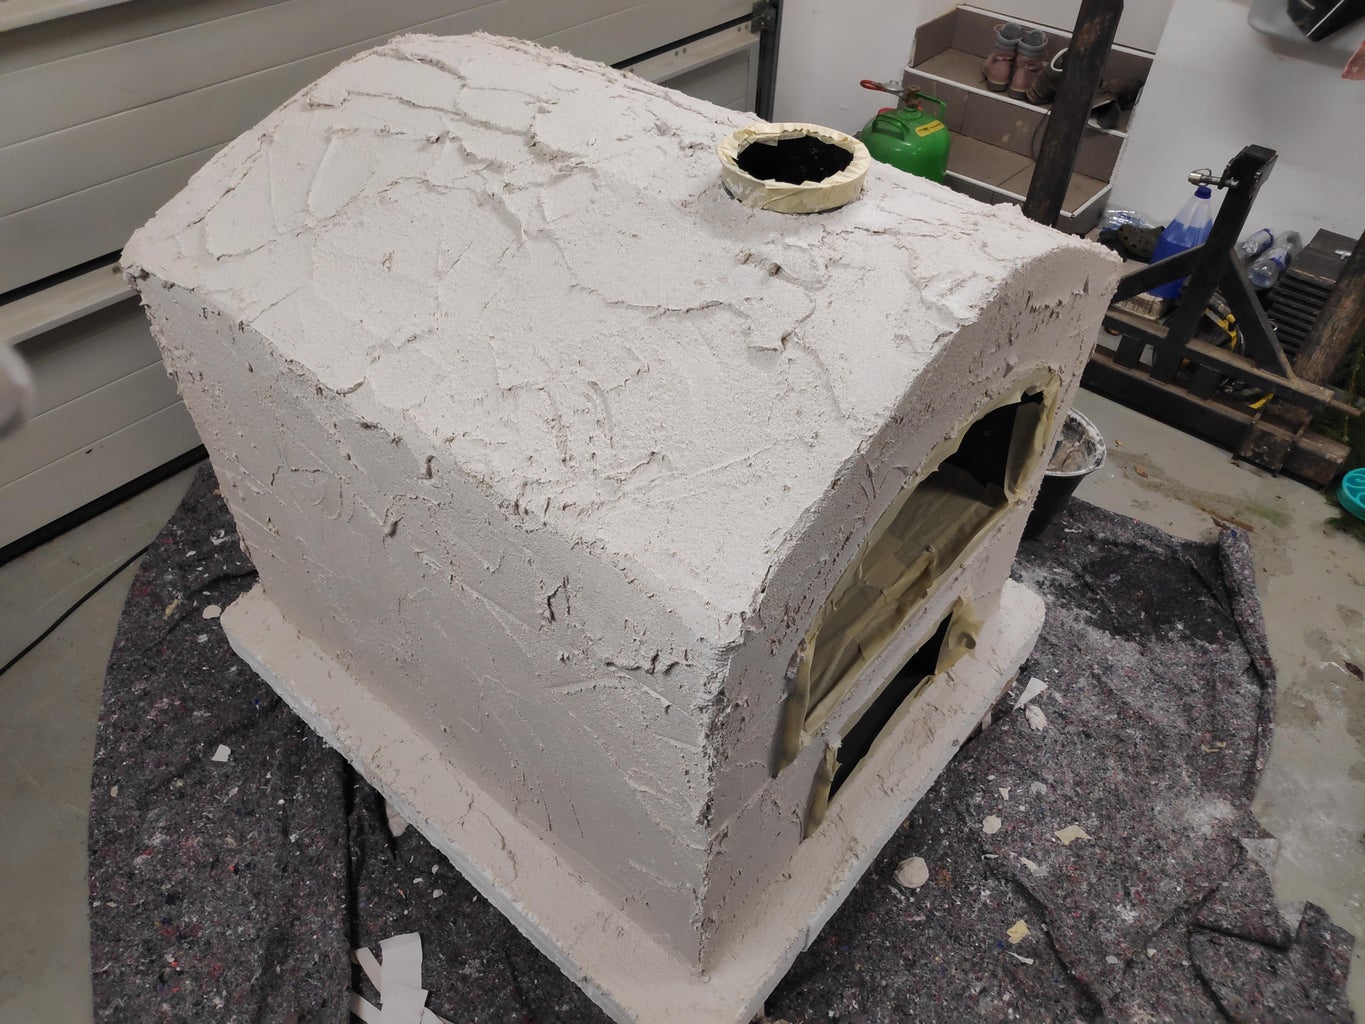 Plaster/paint the Oven